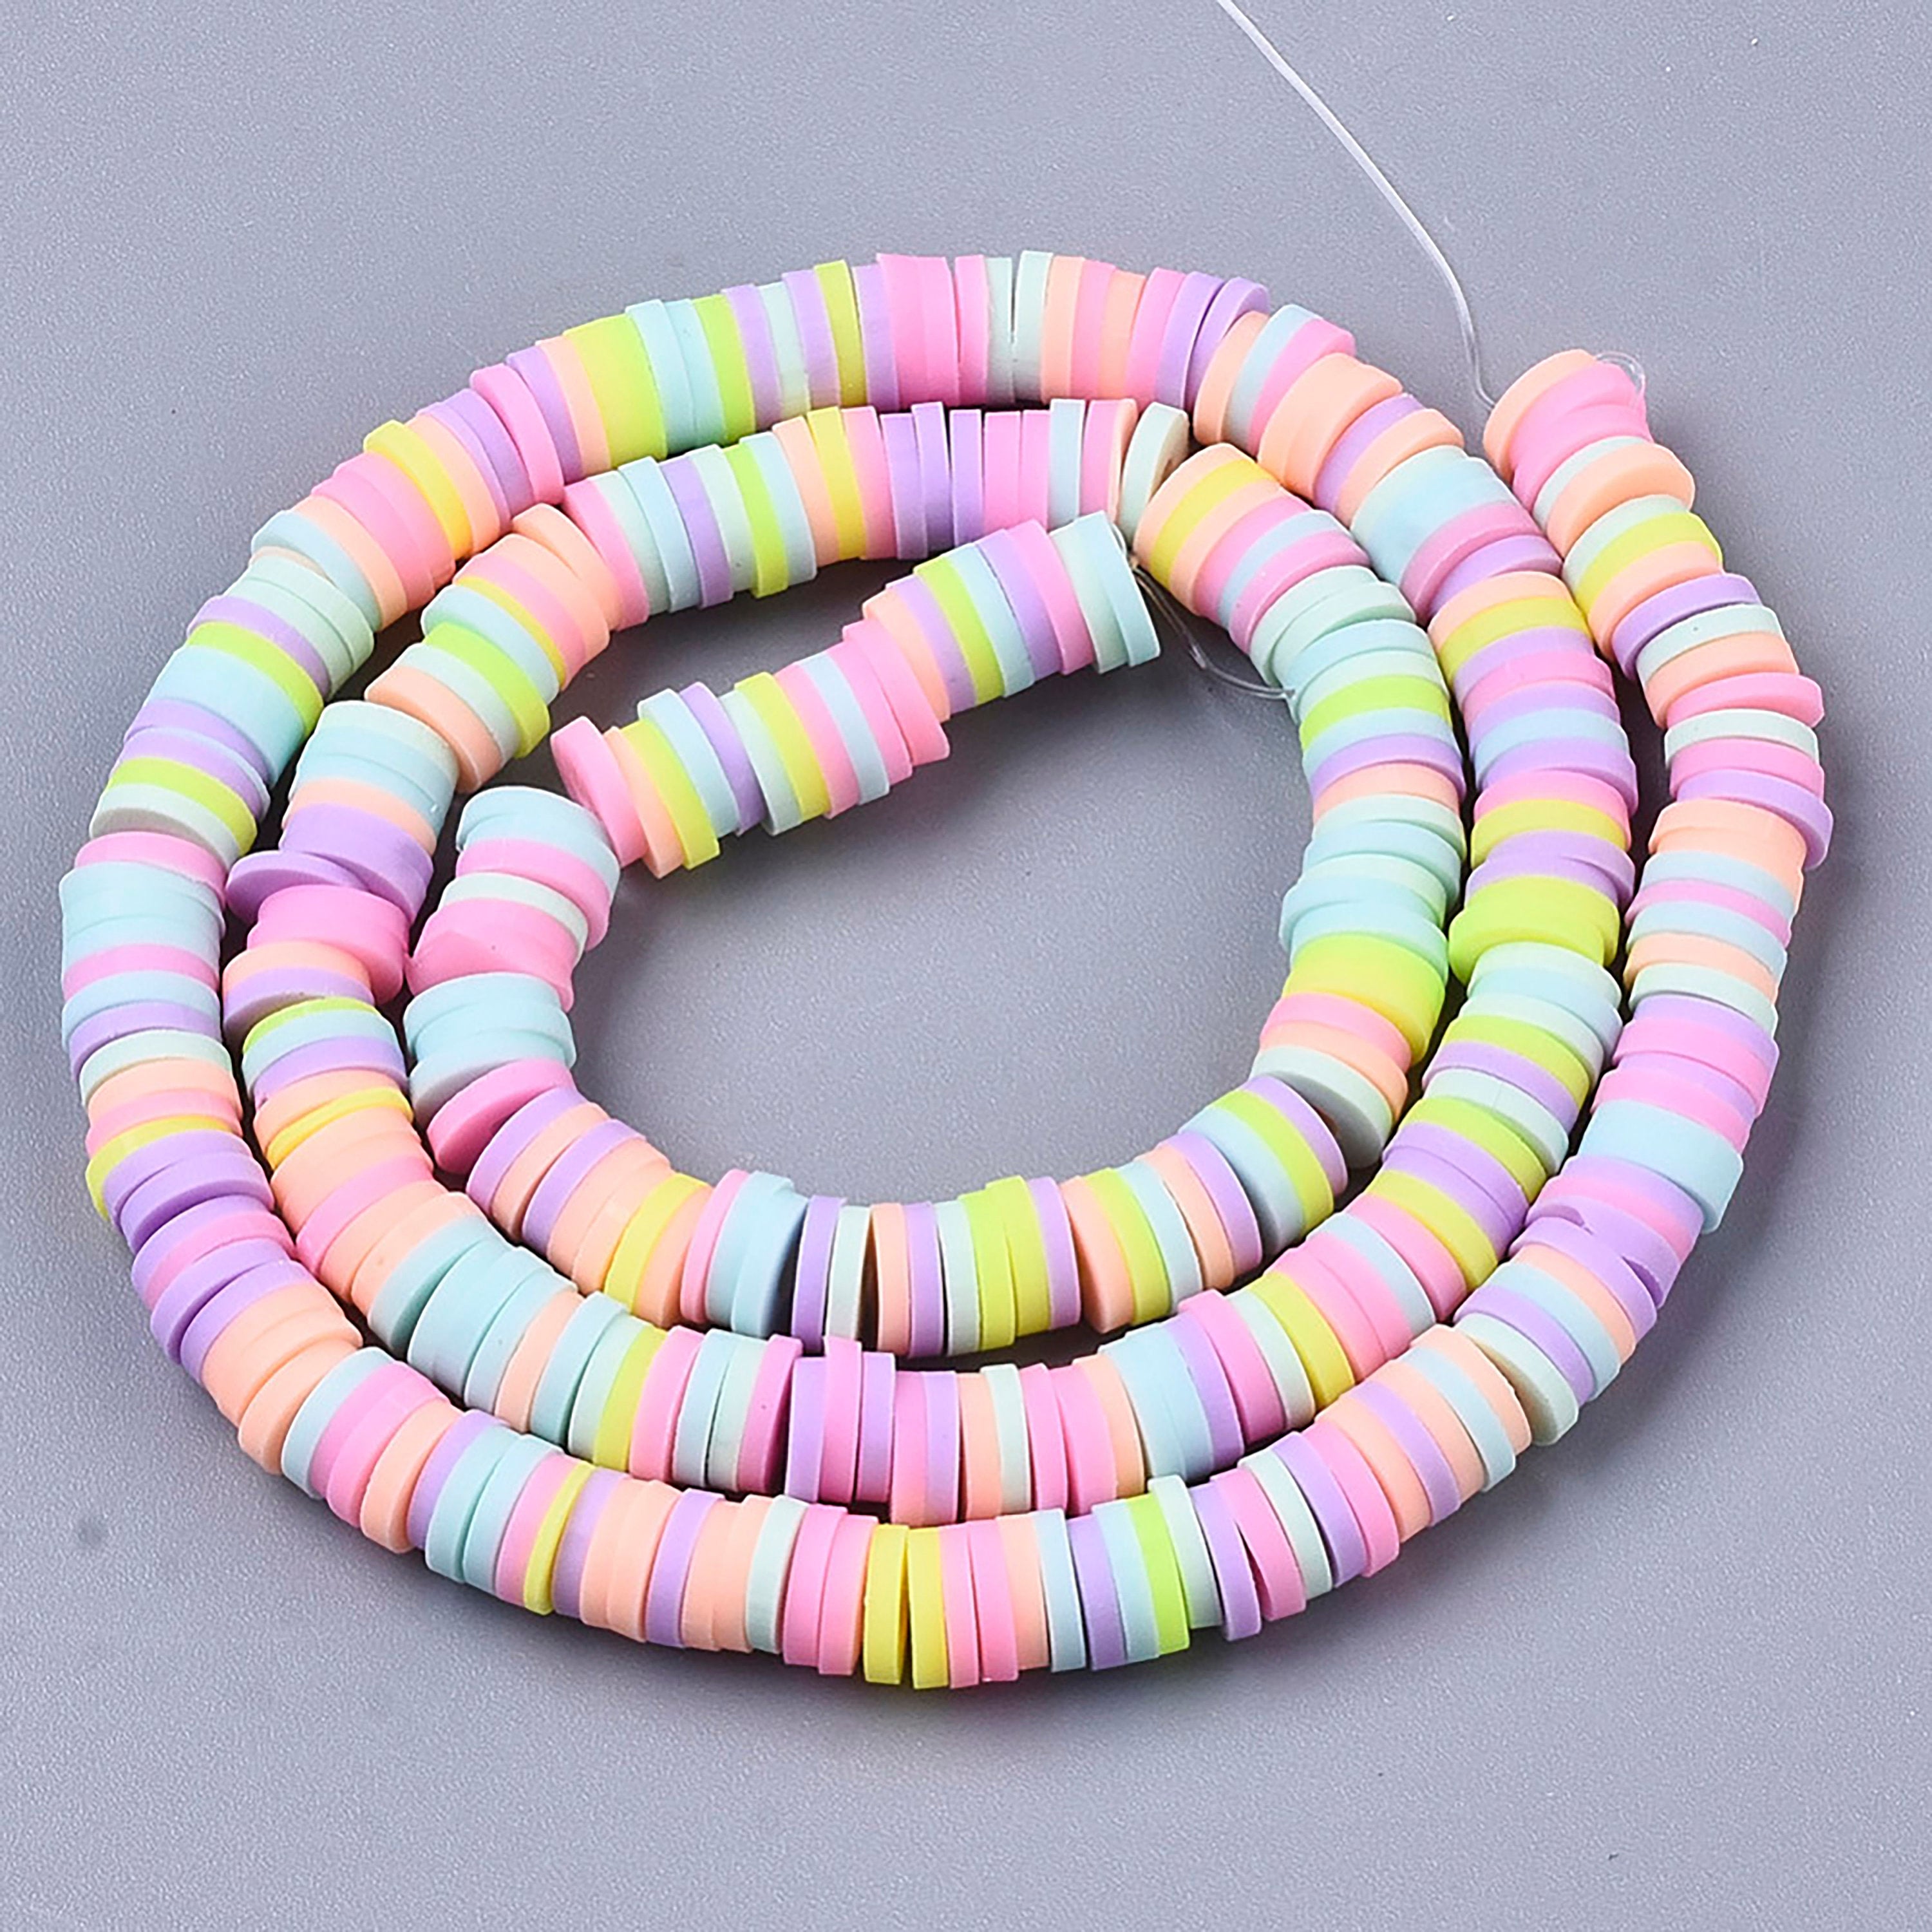 1 Strand, 6mm, Heishi Beads, Environmental Handmade Polymer Clay Beads, Disc/Flat Round  in pastel shades